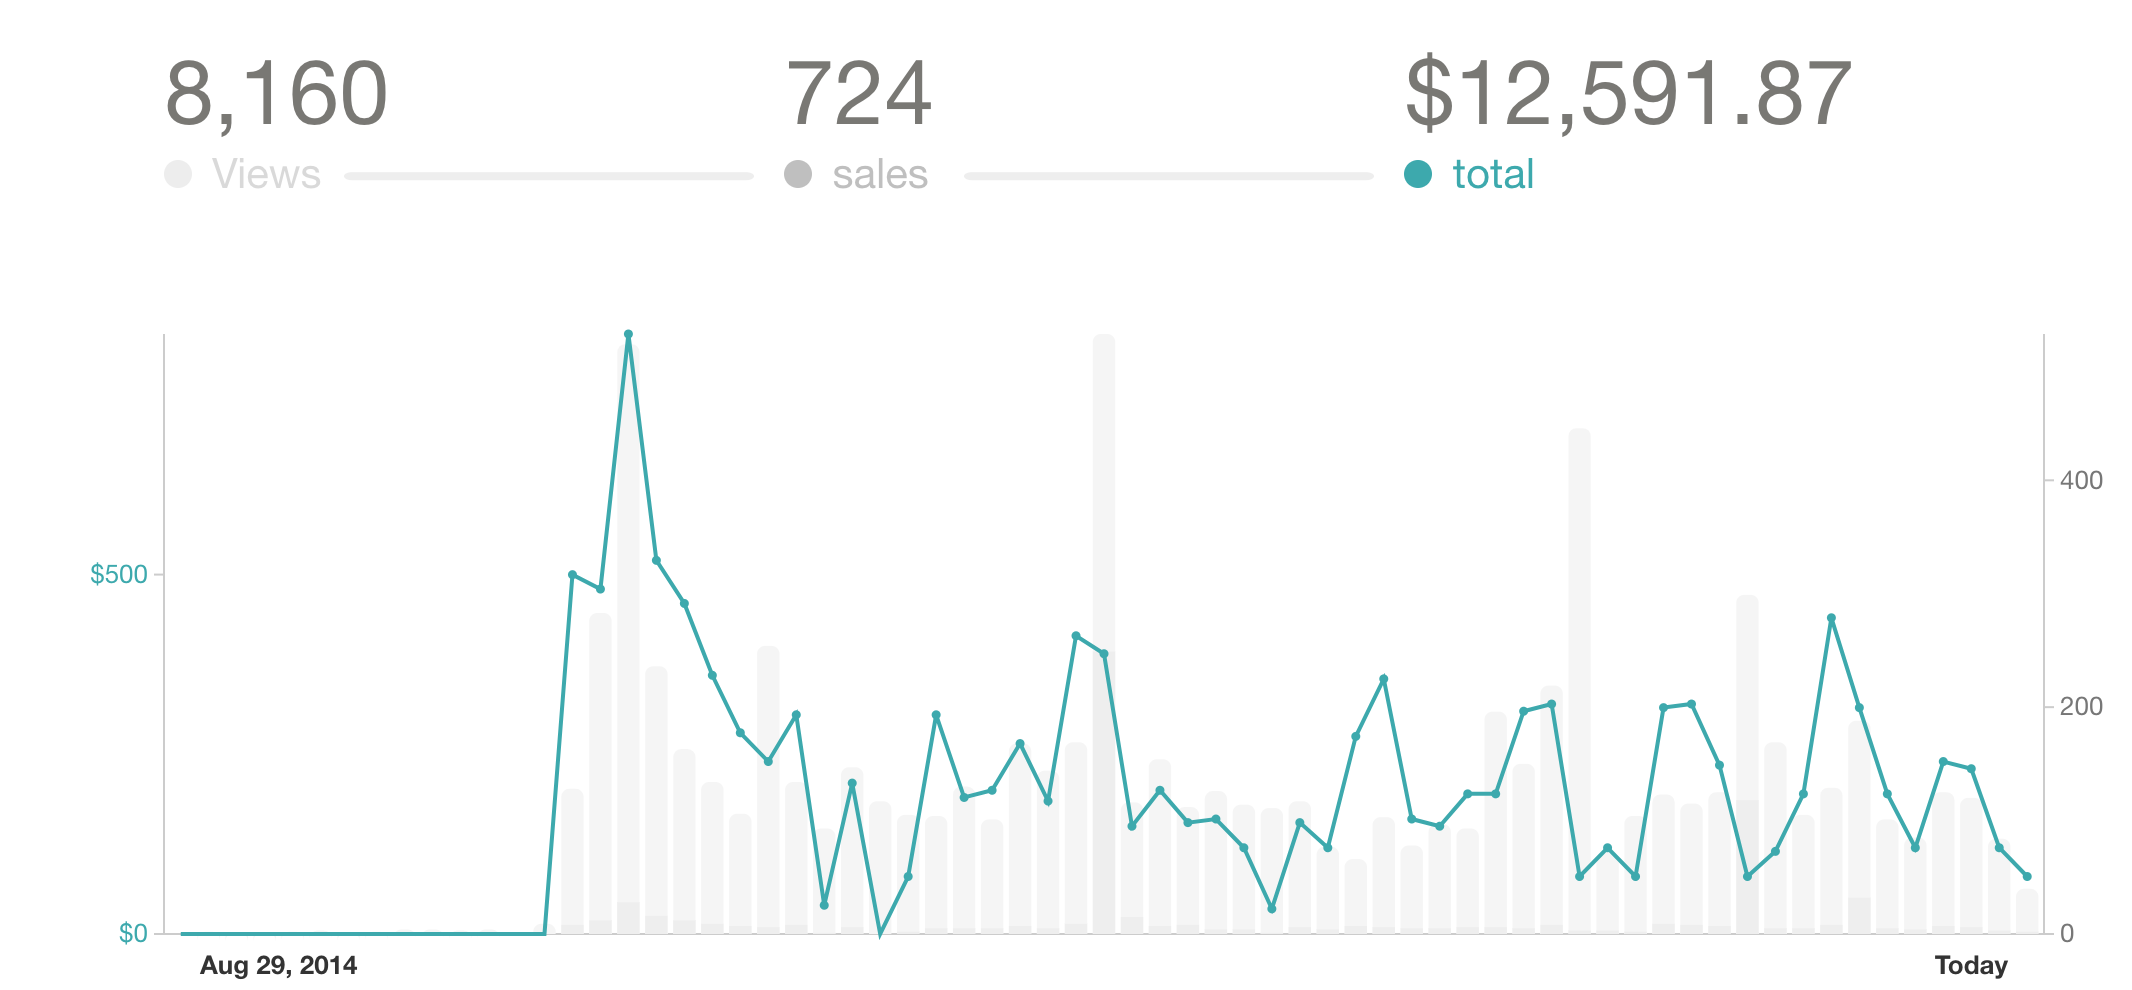 A graph of my Gumroad sales numbers for Rebuilding Rails from 2015 onward.